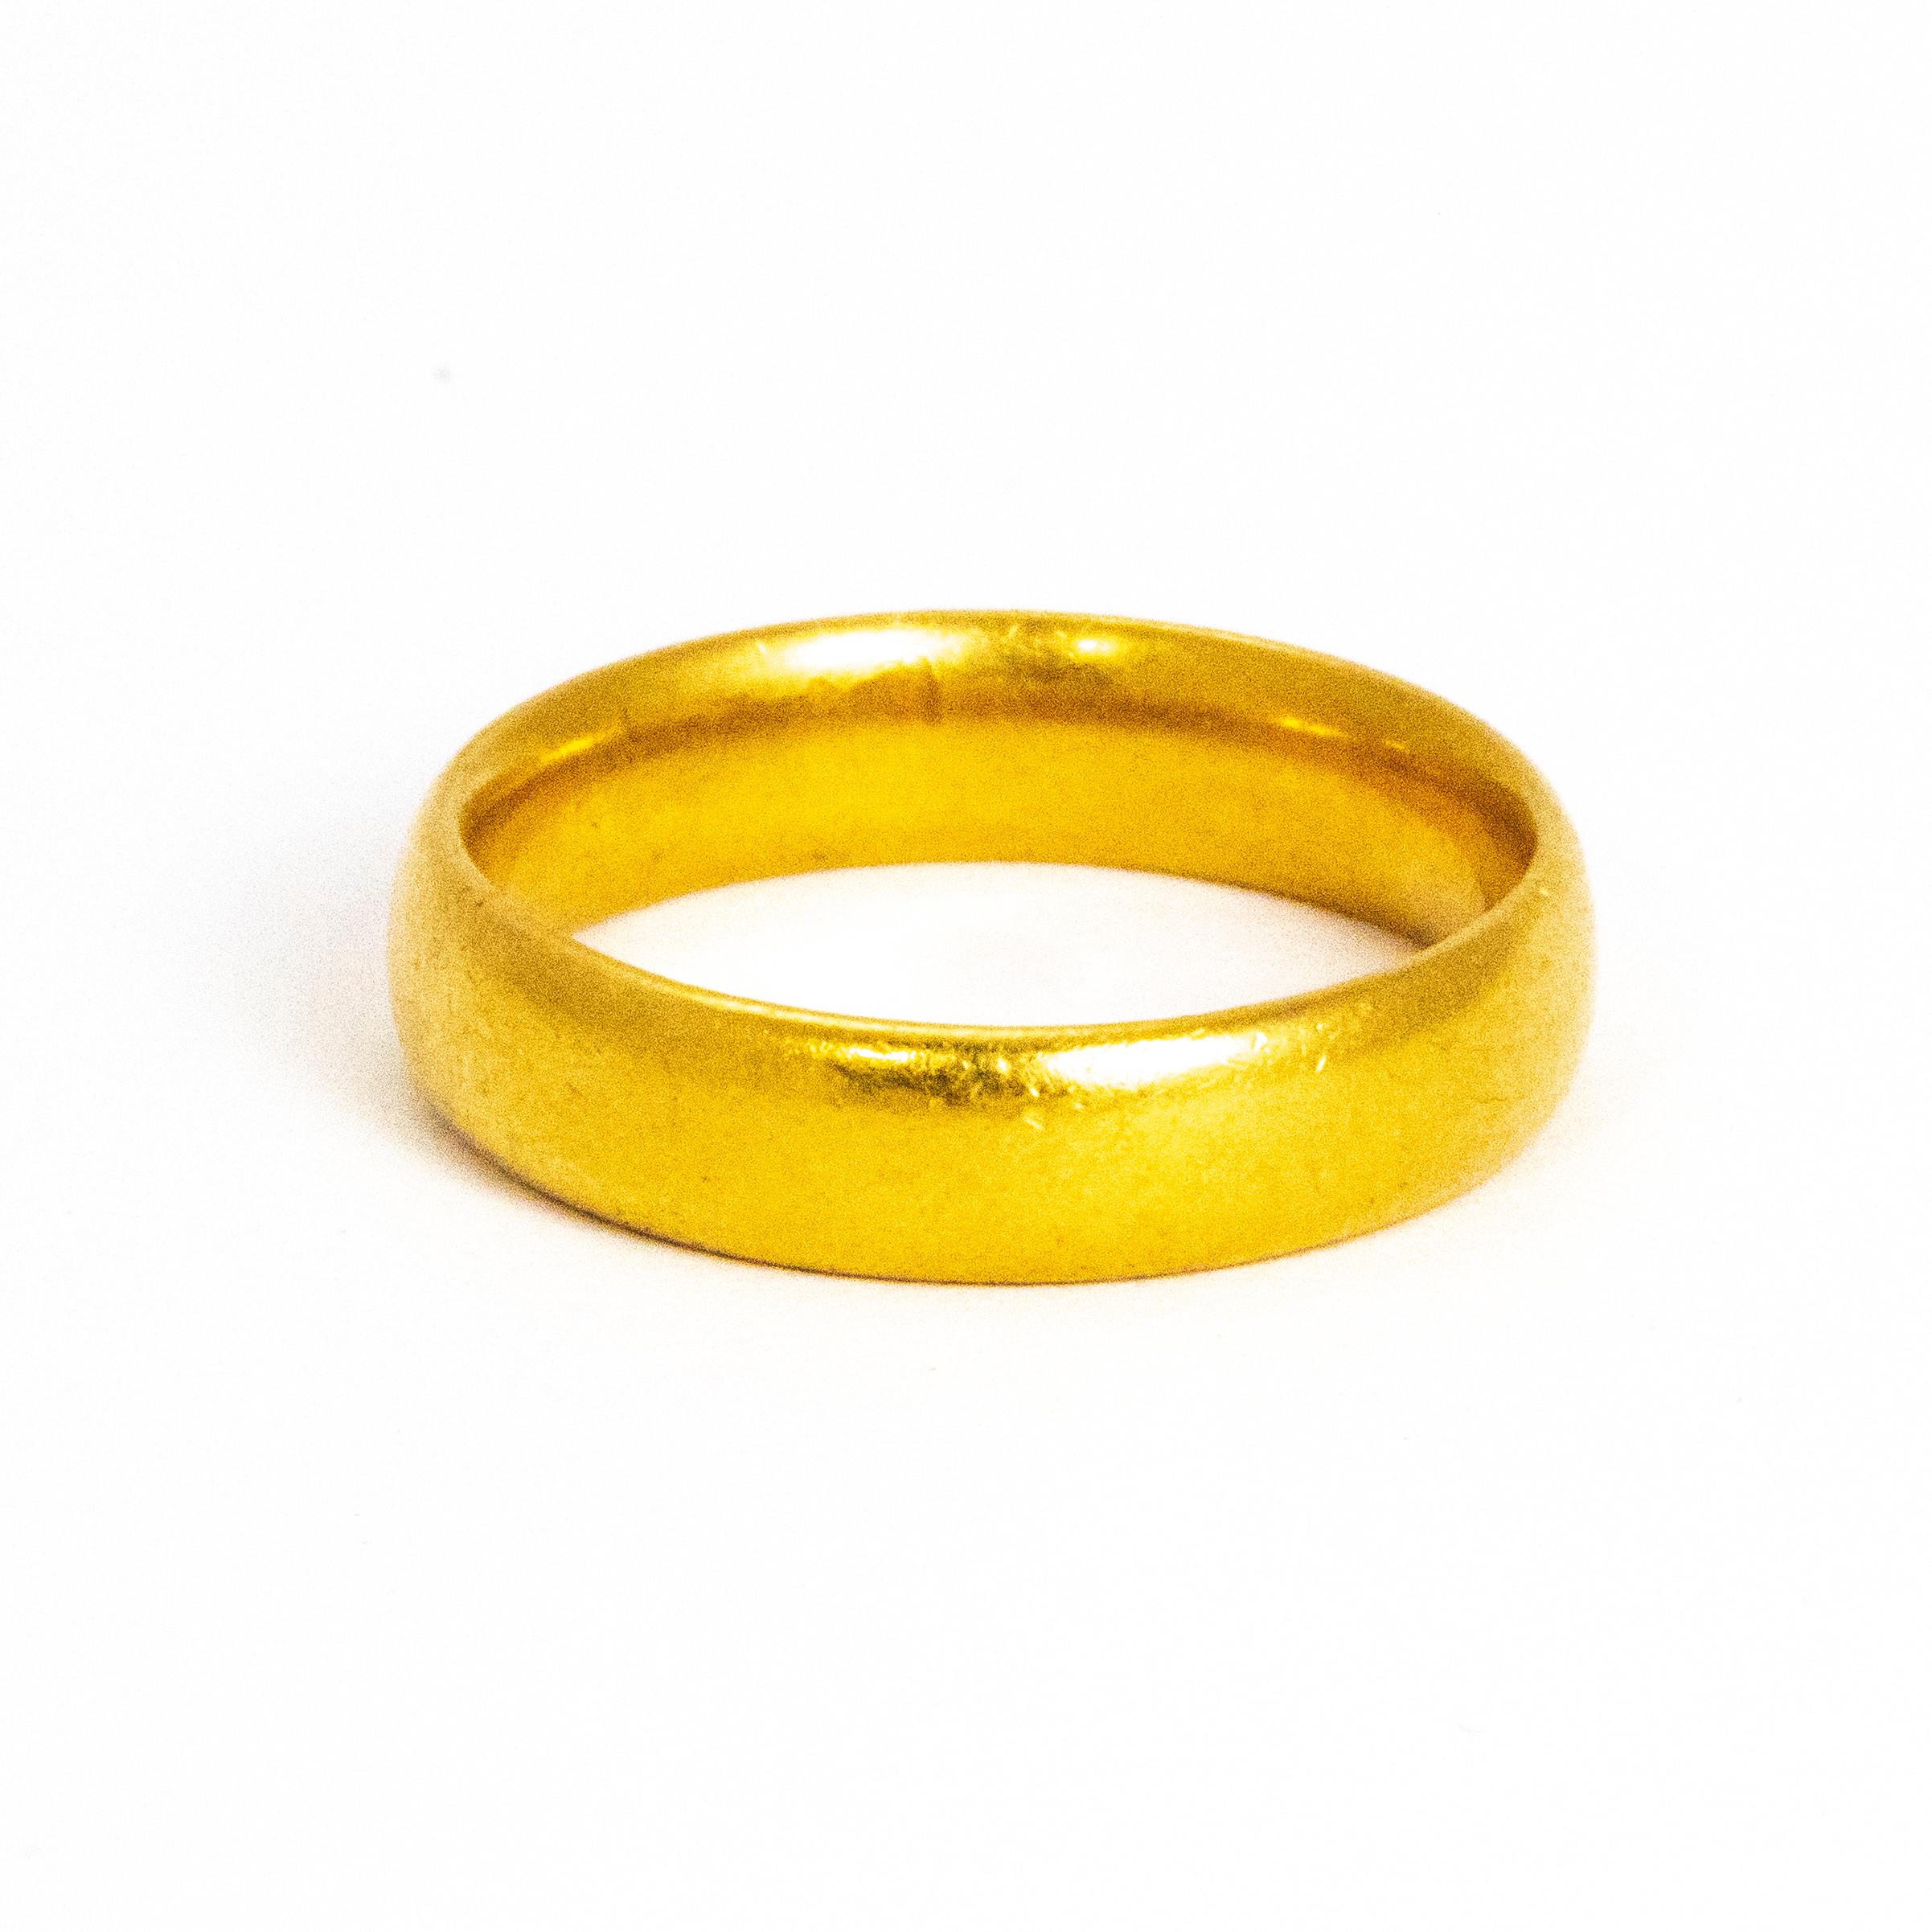 This classic 22ct gold band could be used as a wedding band or a simply lovely everyday ring. Made in Birmingham, England.

Ring Size: M or 6 1/4
Band Width: 4mm